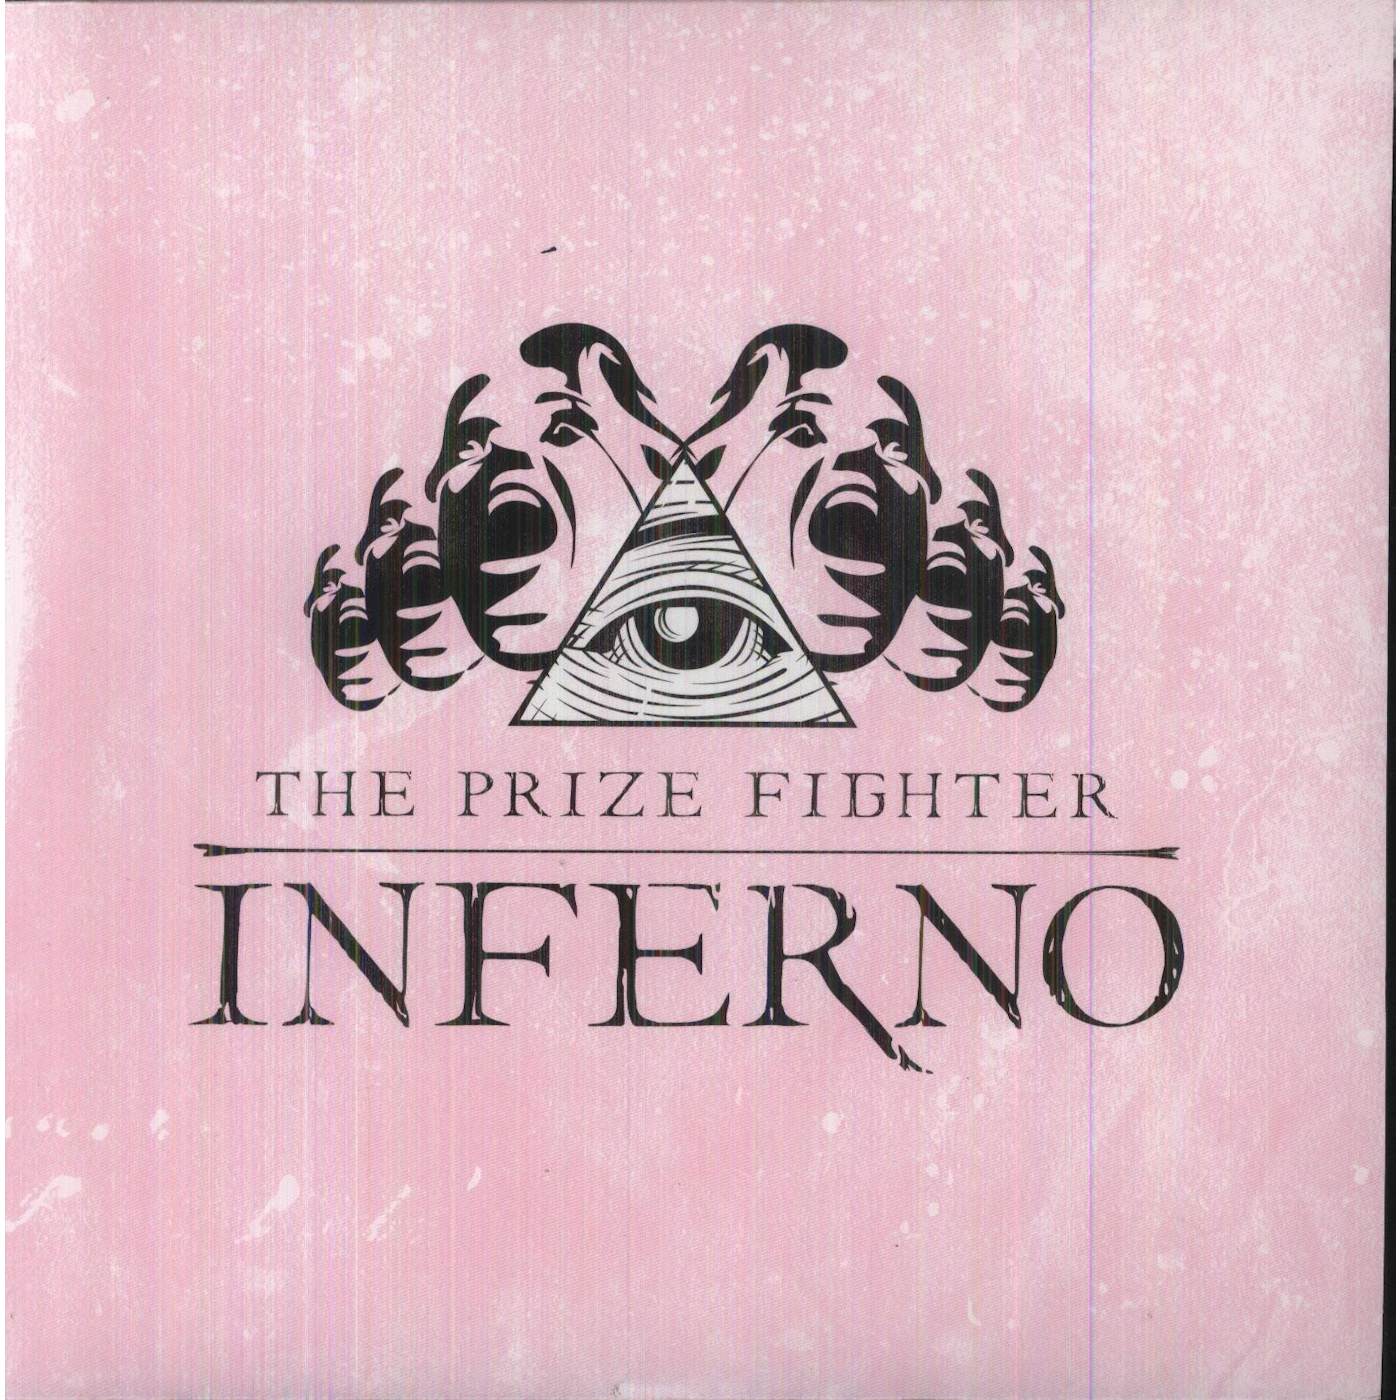 The Prize Fighter Inferno Half Measures Vinyl Record